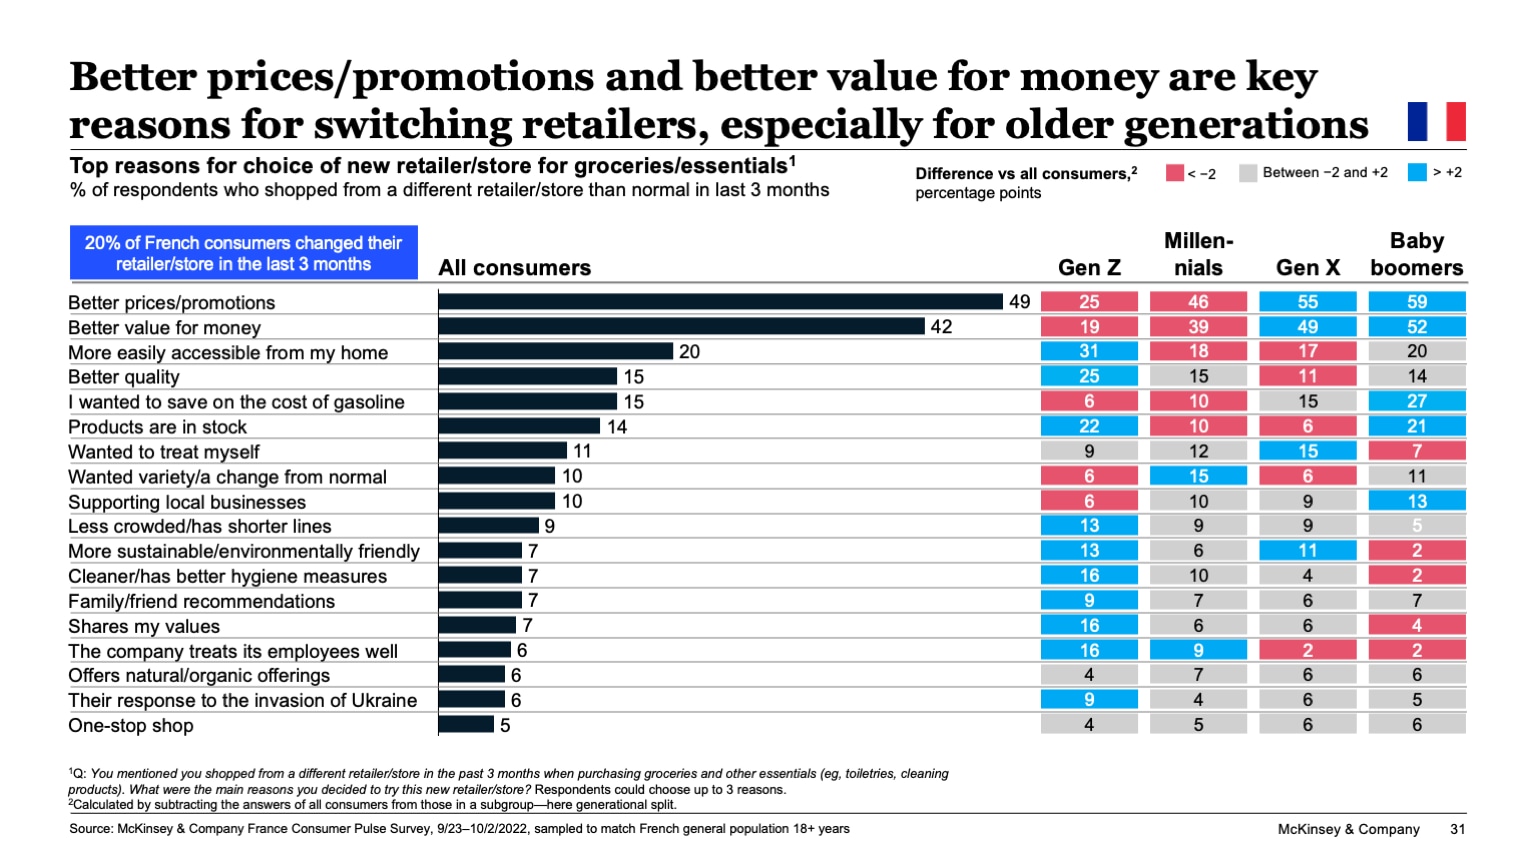 Better prices/promotions and better value for money are key reasons for switching retailers, especially for older generations